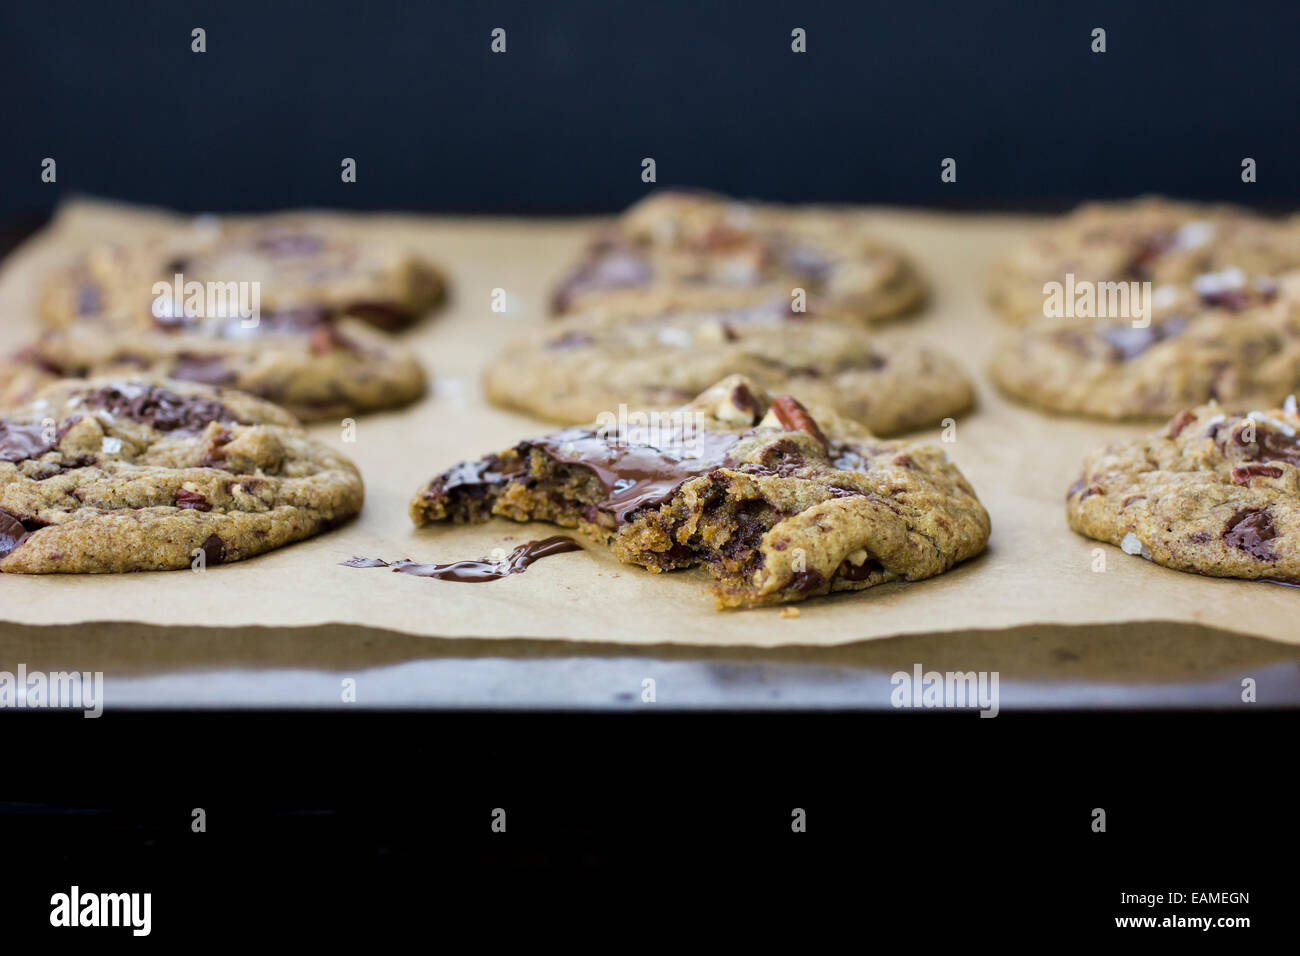 Gooey Chocolate Chip Cookies with Salt and Pecans, Freshly Baked Stock Photo